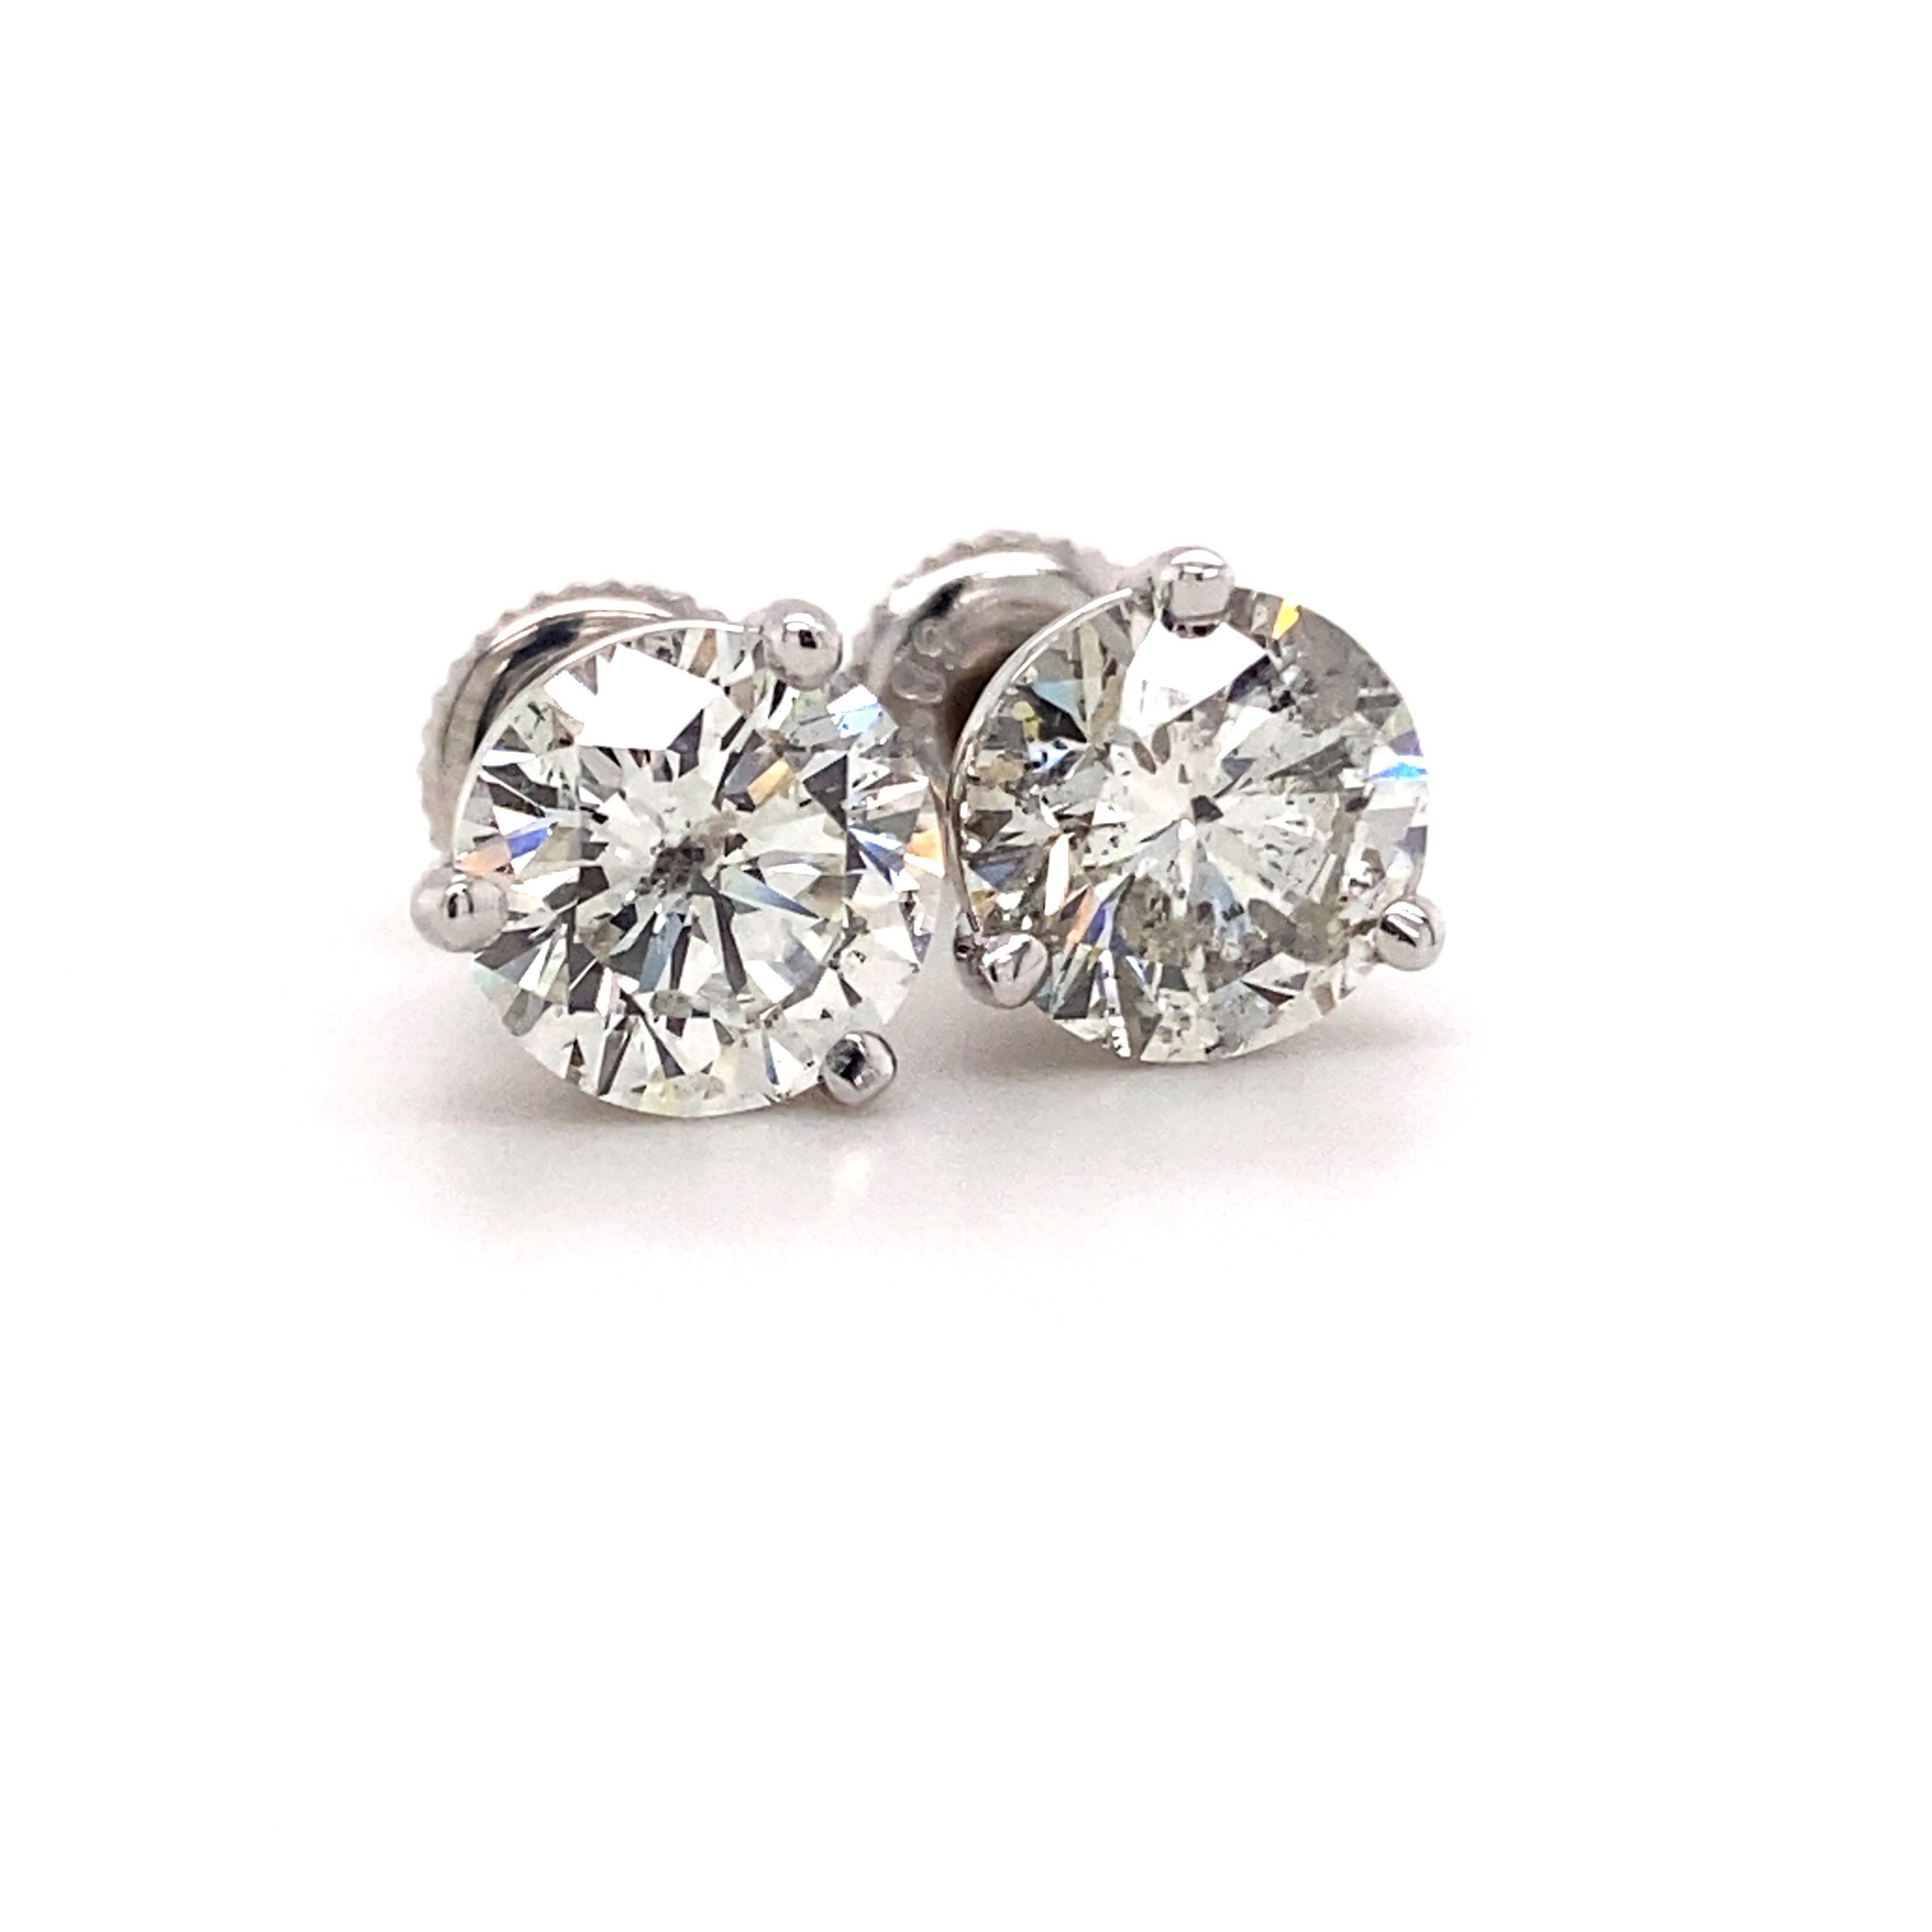 Round Brilliant Diamond 3.17 Tcw Martini Set Stud Earrings 14kt White Gold In New Condition For Sale In San Diego, CA